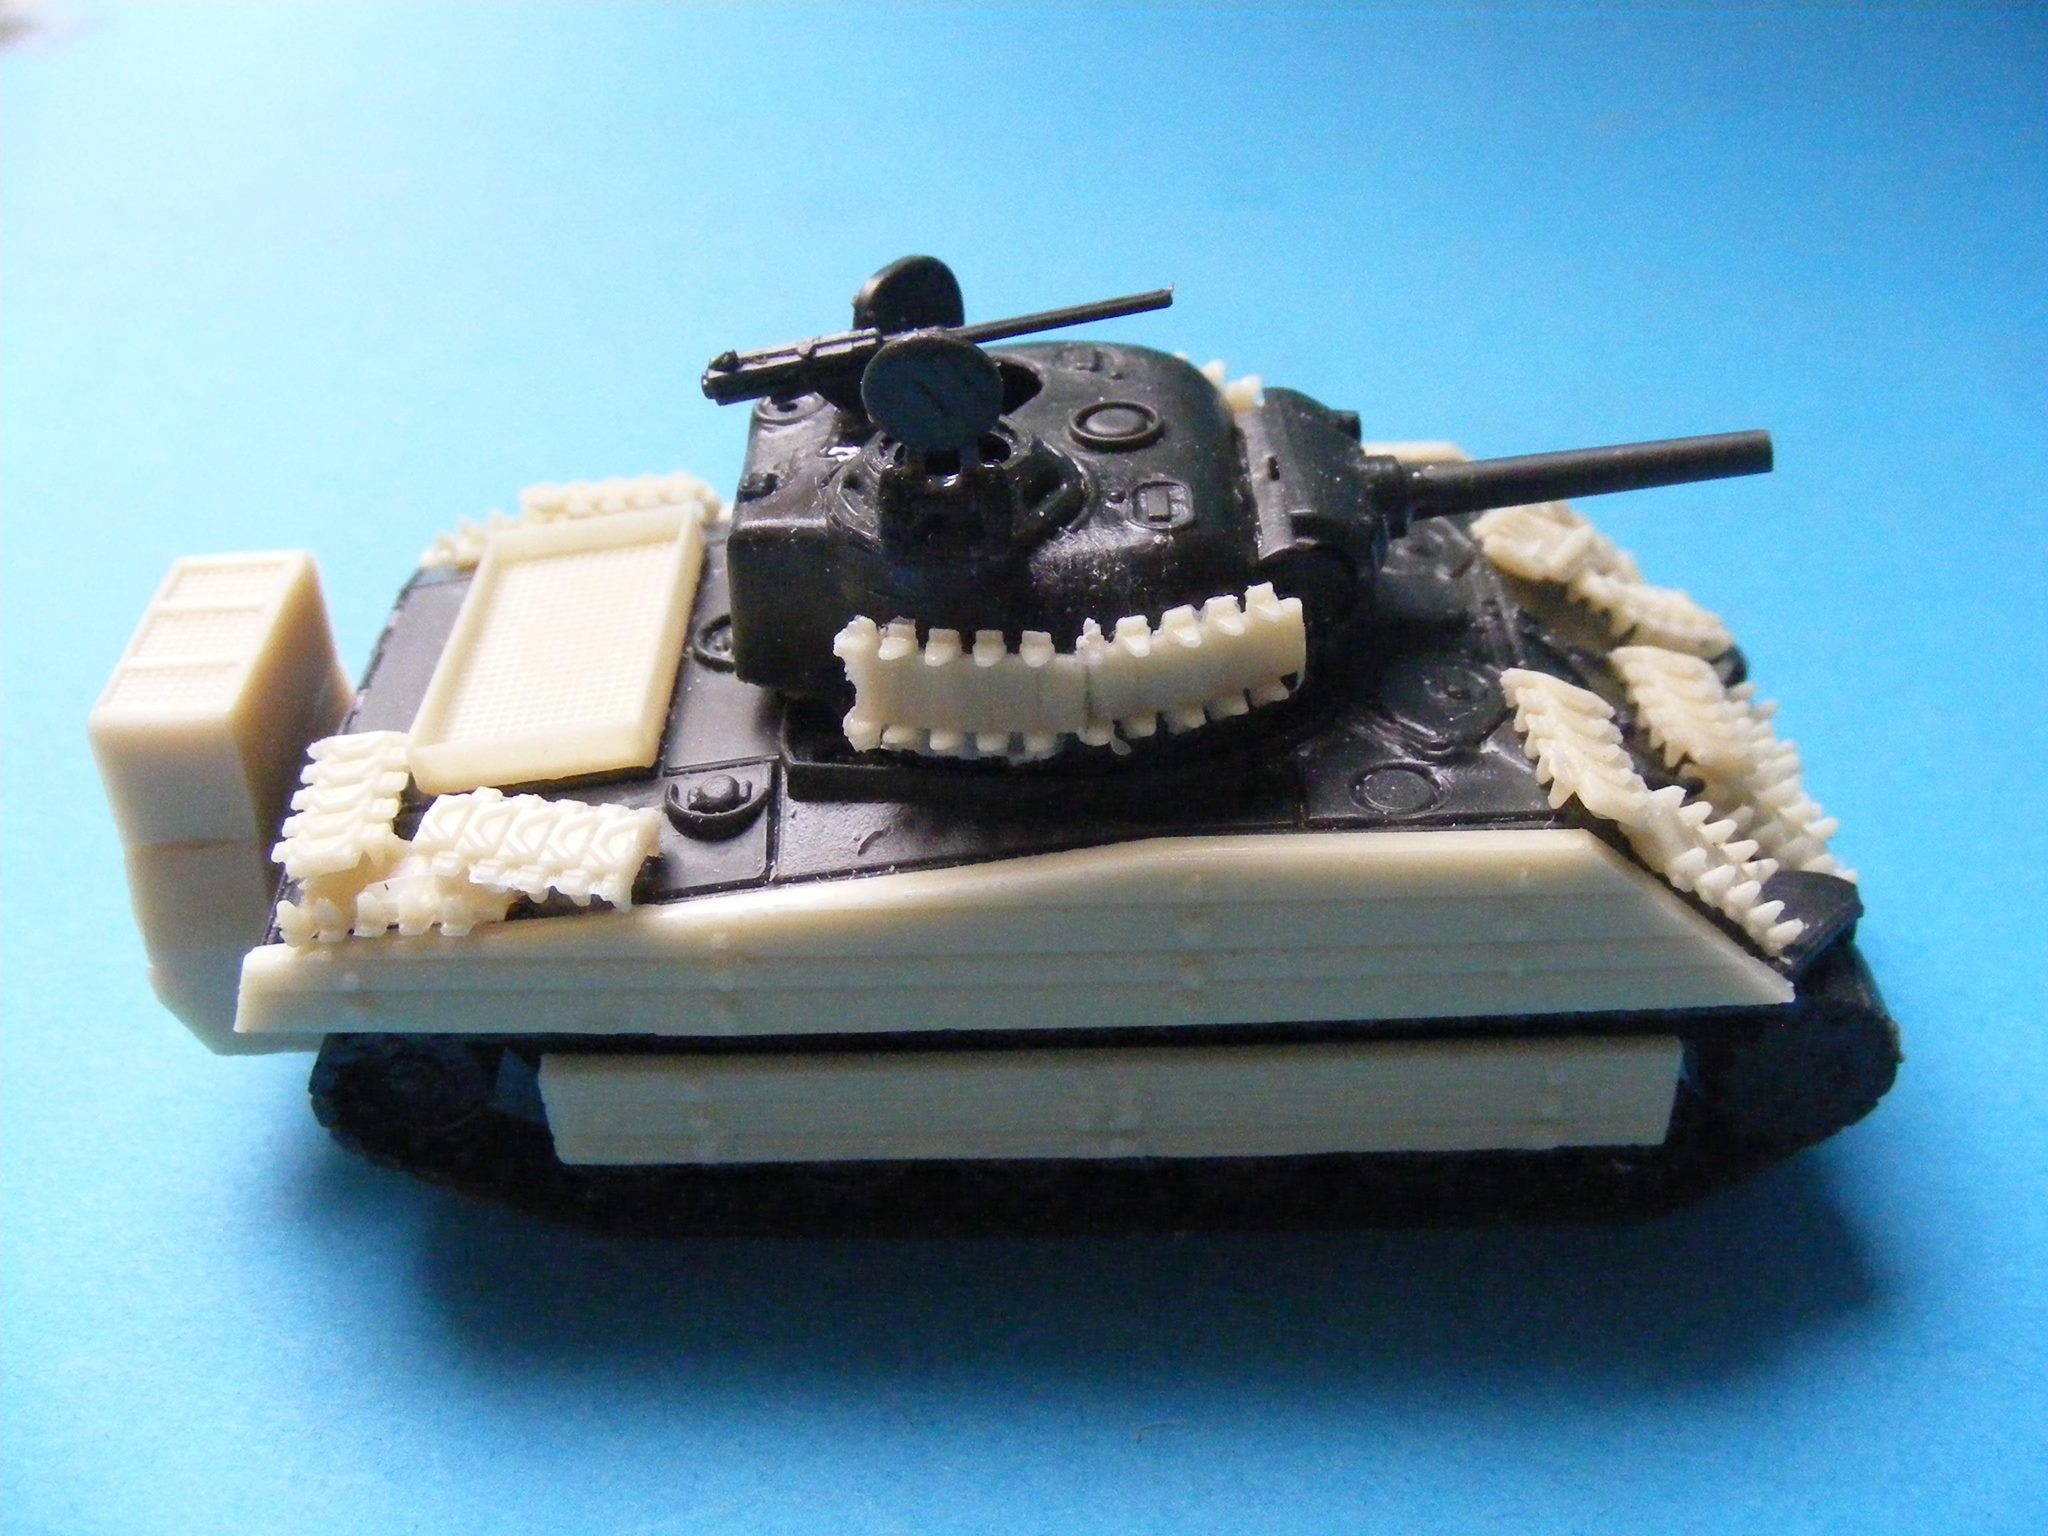 Sherman in Pacific - uparmored with wood & tracks